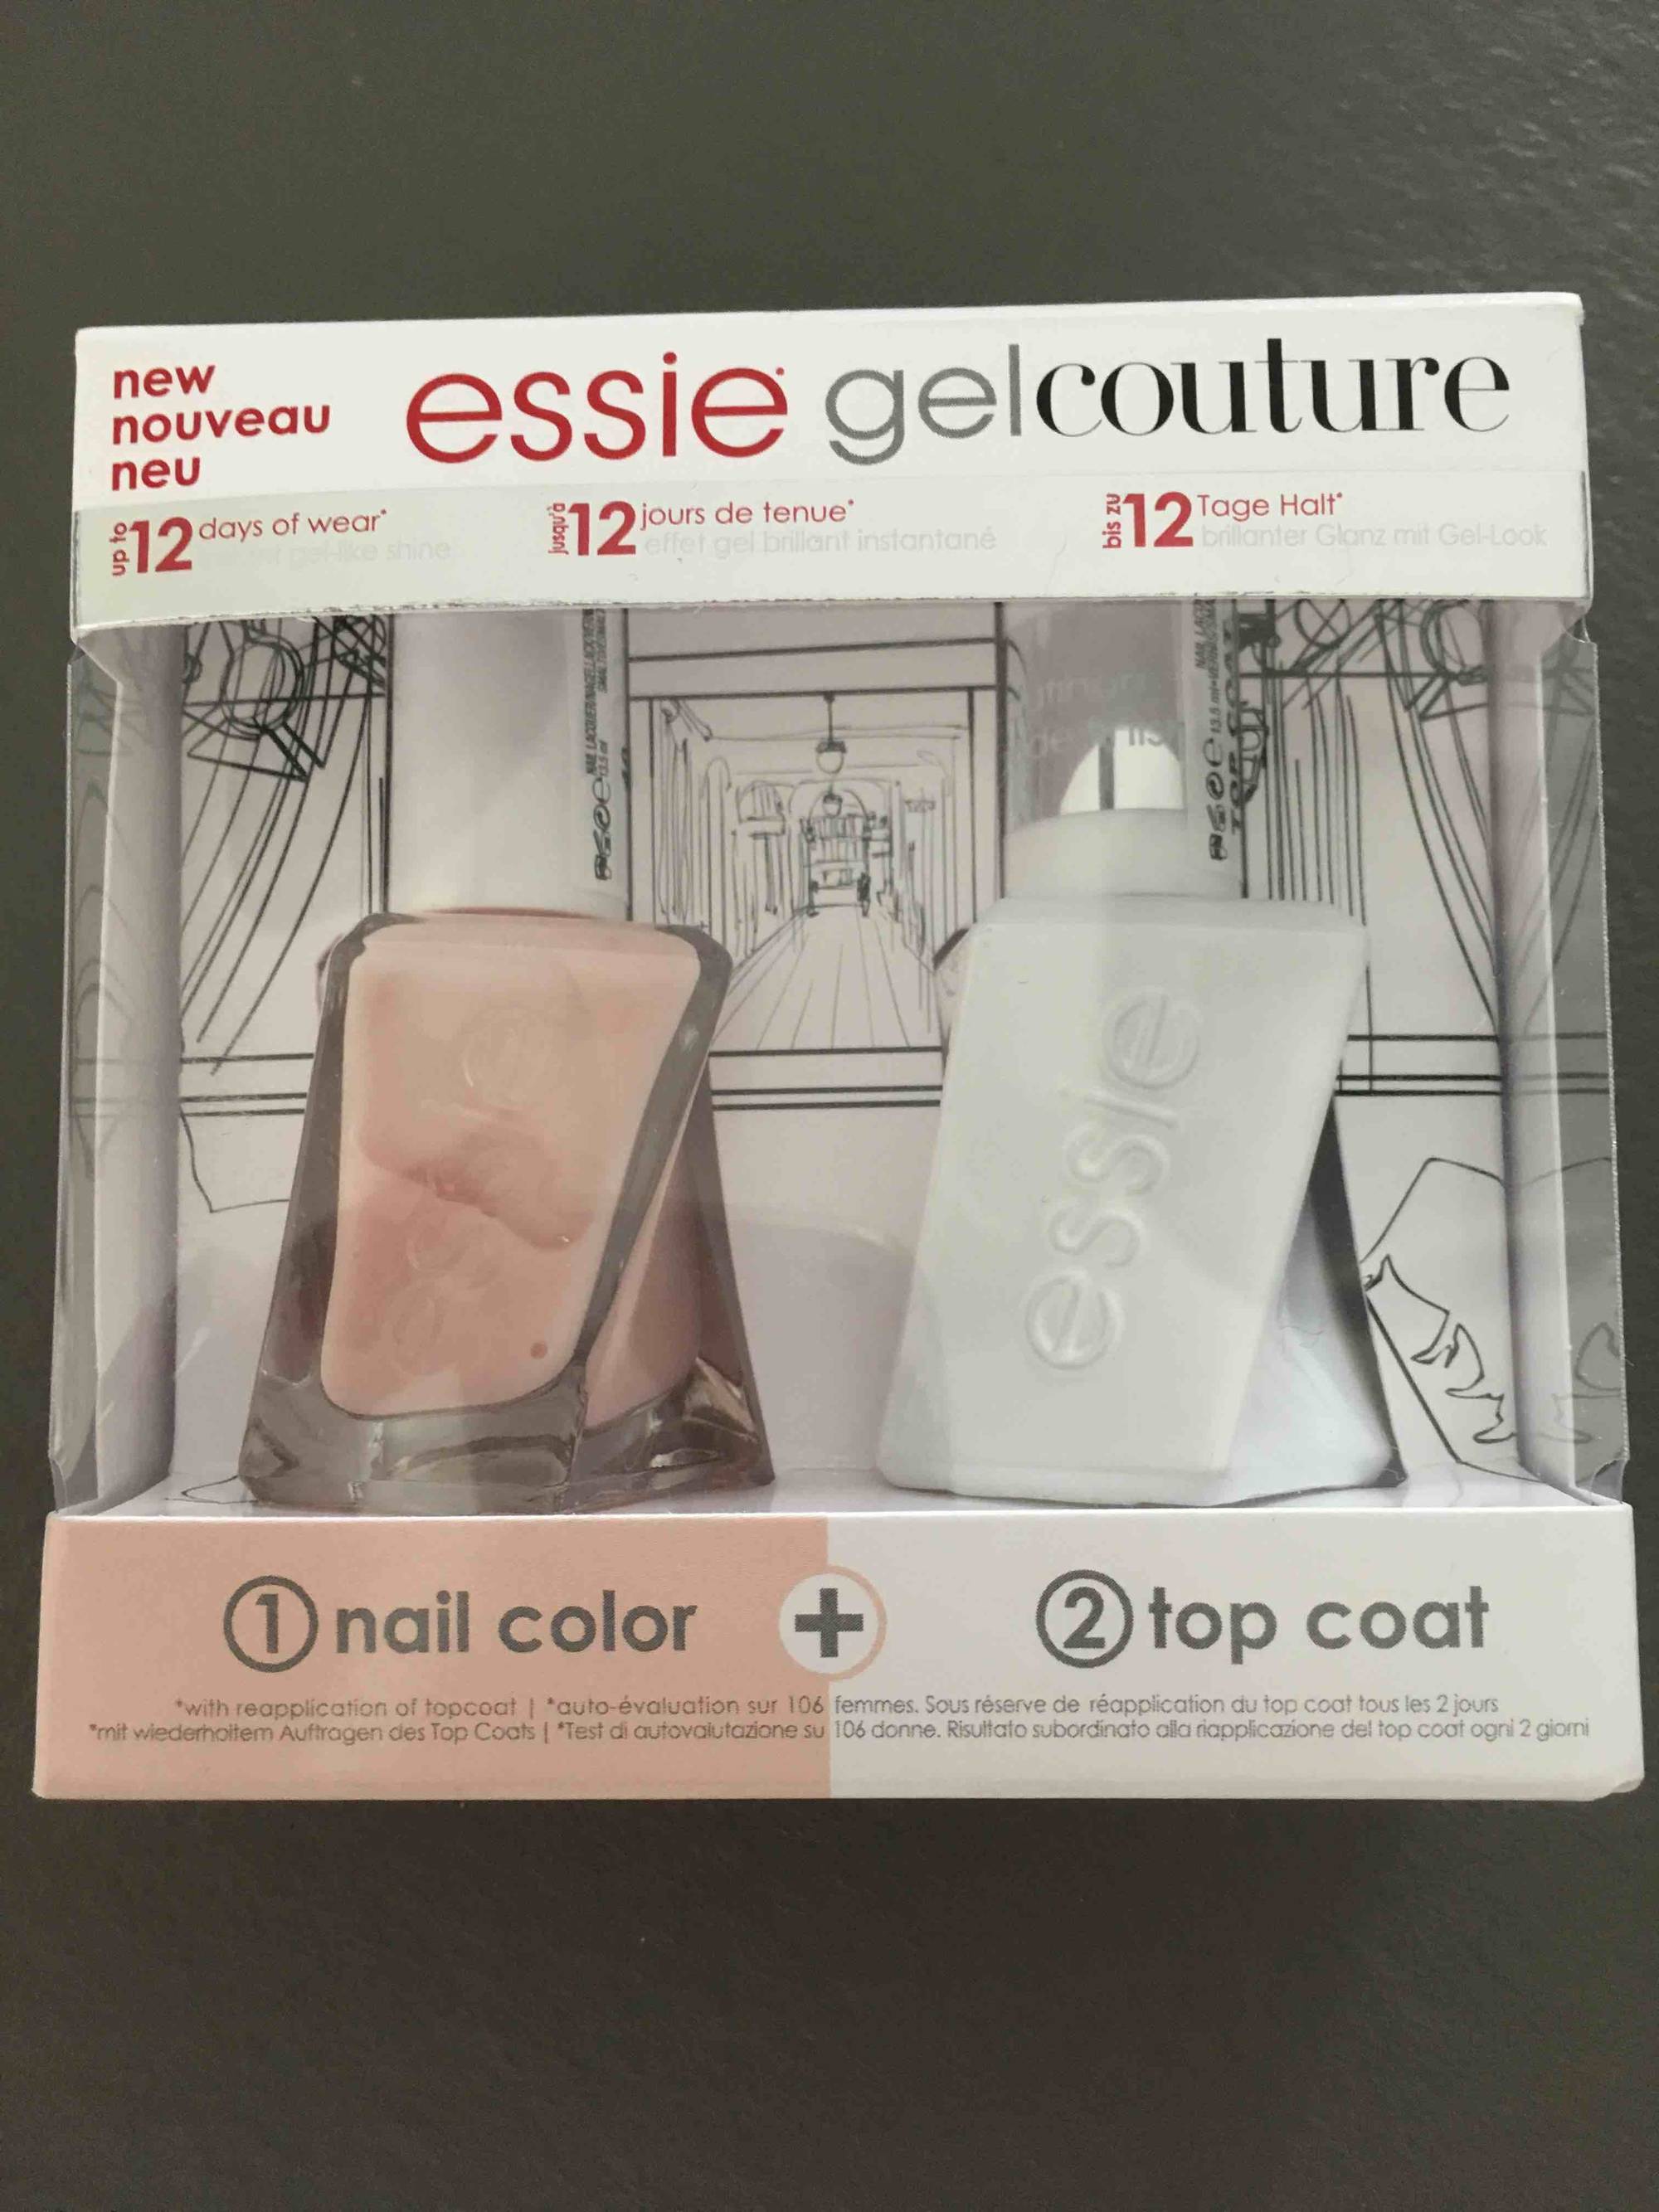 ESSIE - Gel couture nail color + top coat